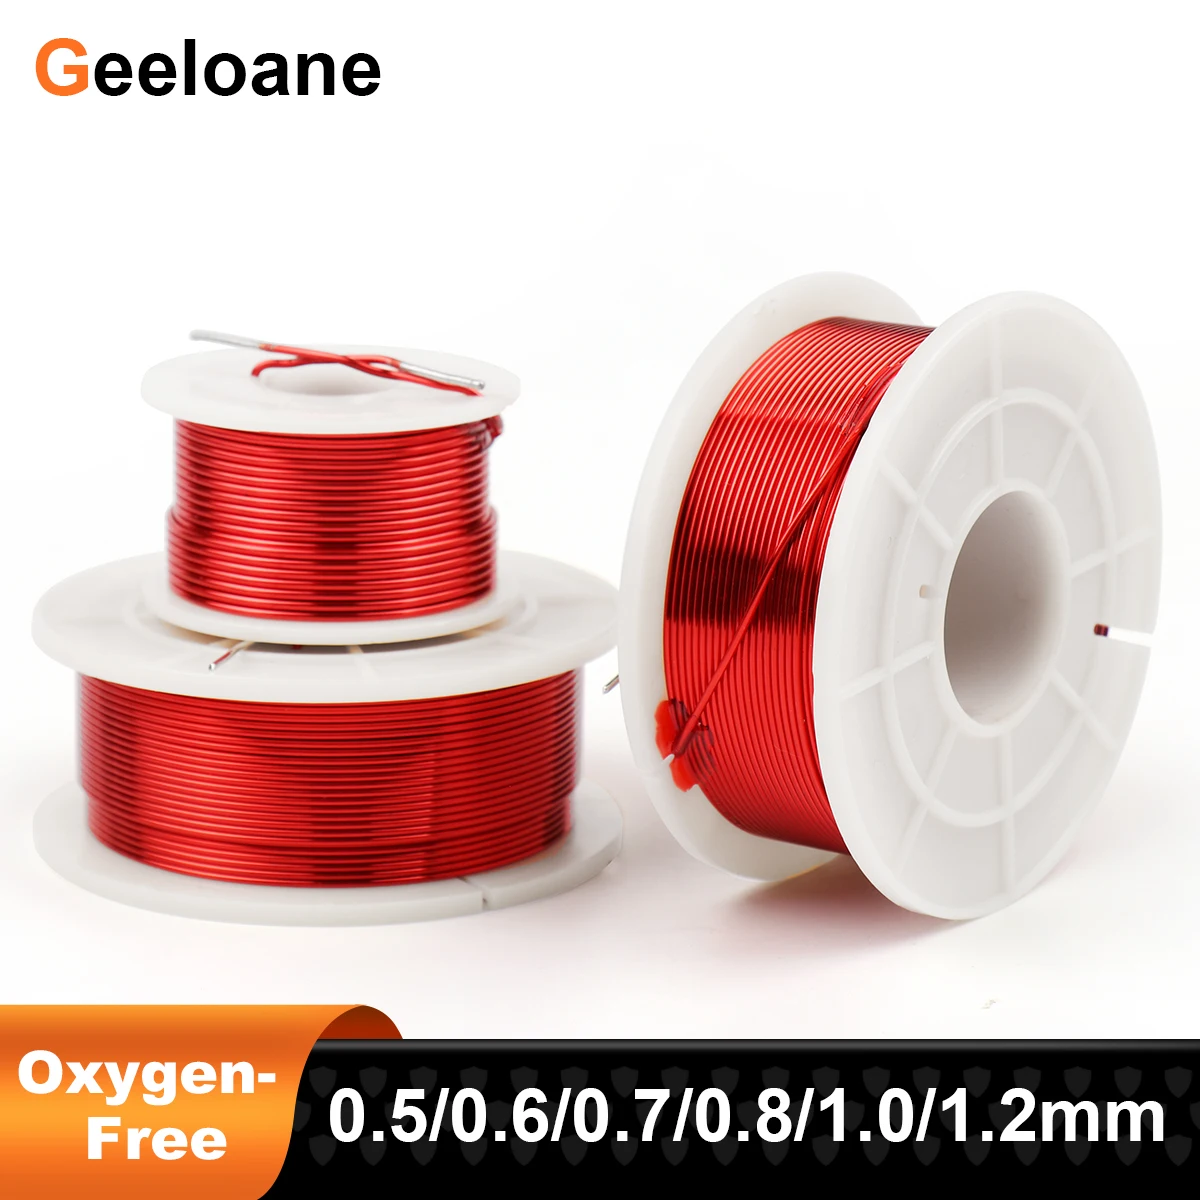 

GEELOANE Air-core Oxygen-Free Copper Inductor Amplifier Crossover Frequency Divider Coil Inductance 0.5mH-5mH 0.8/1.0/1.2/1.3mm